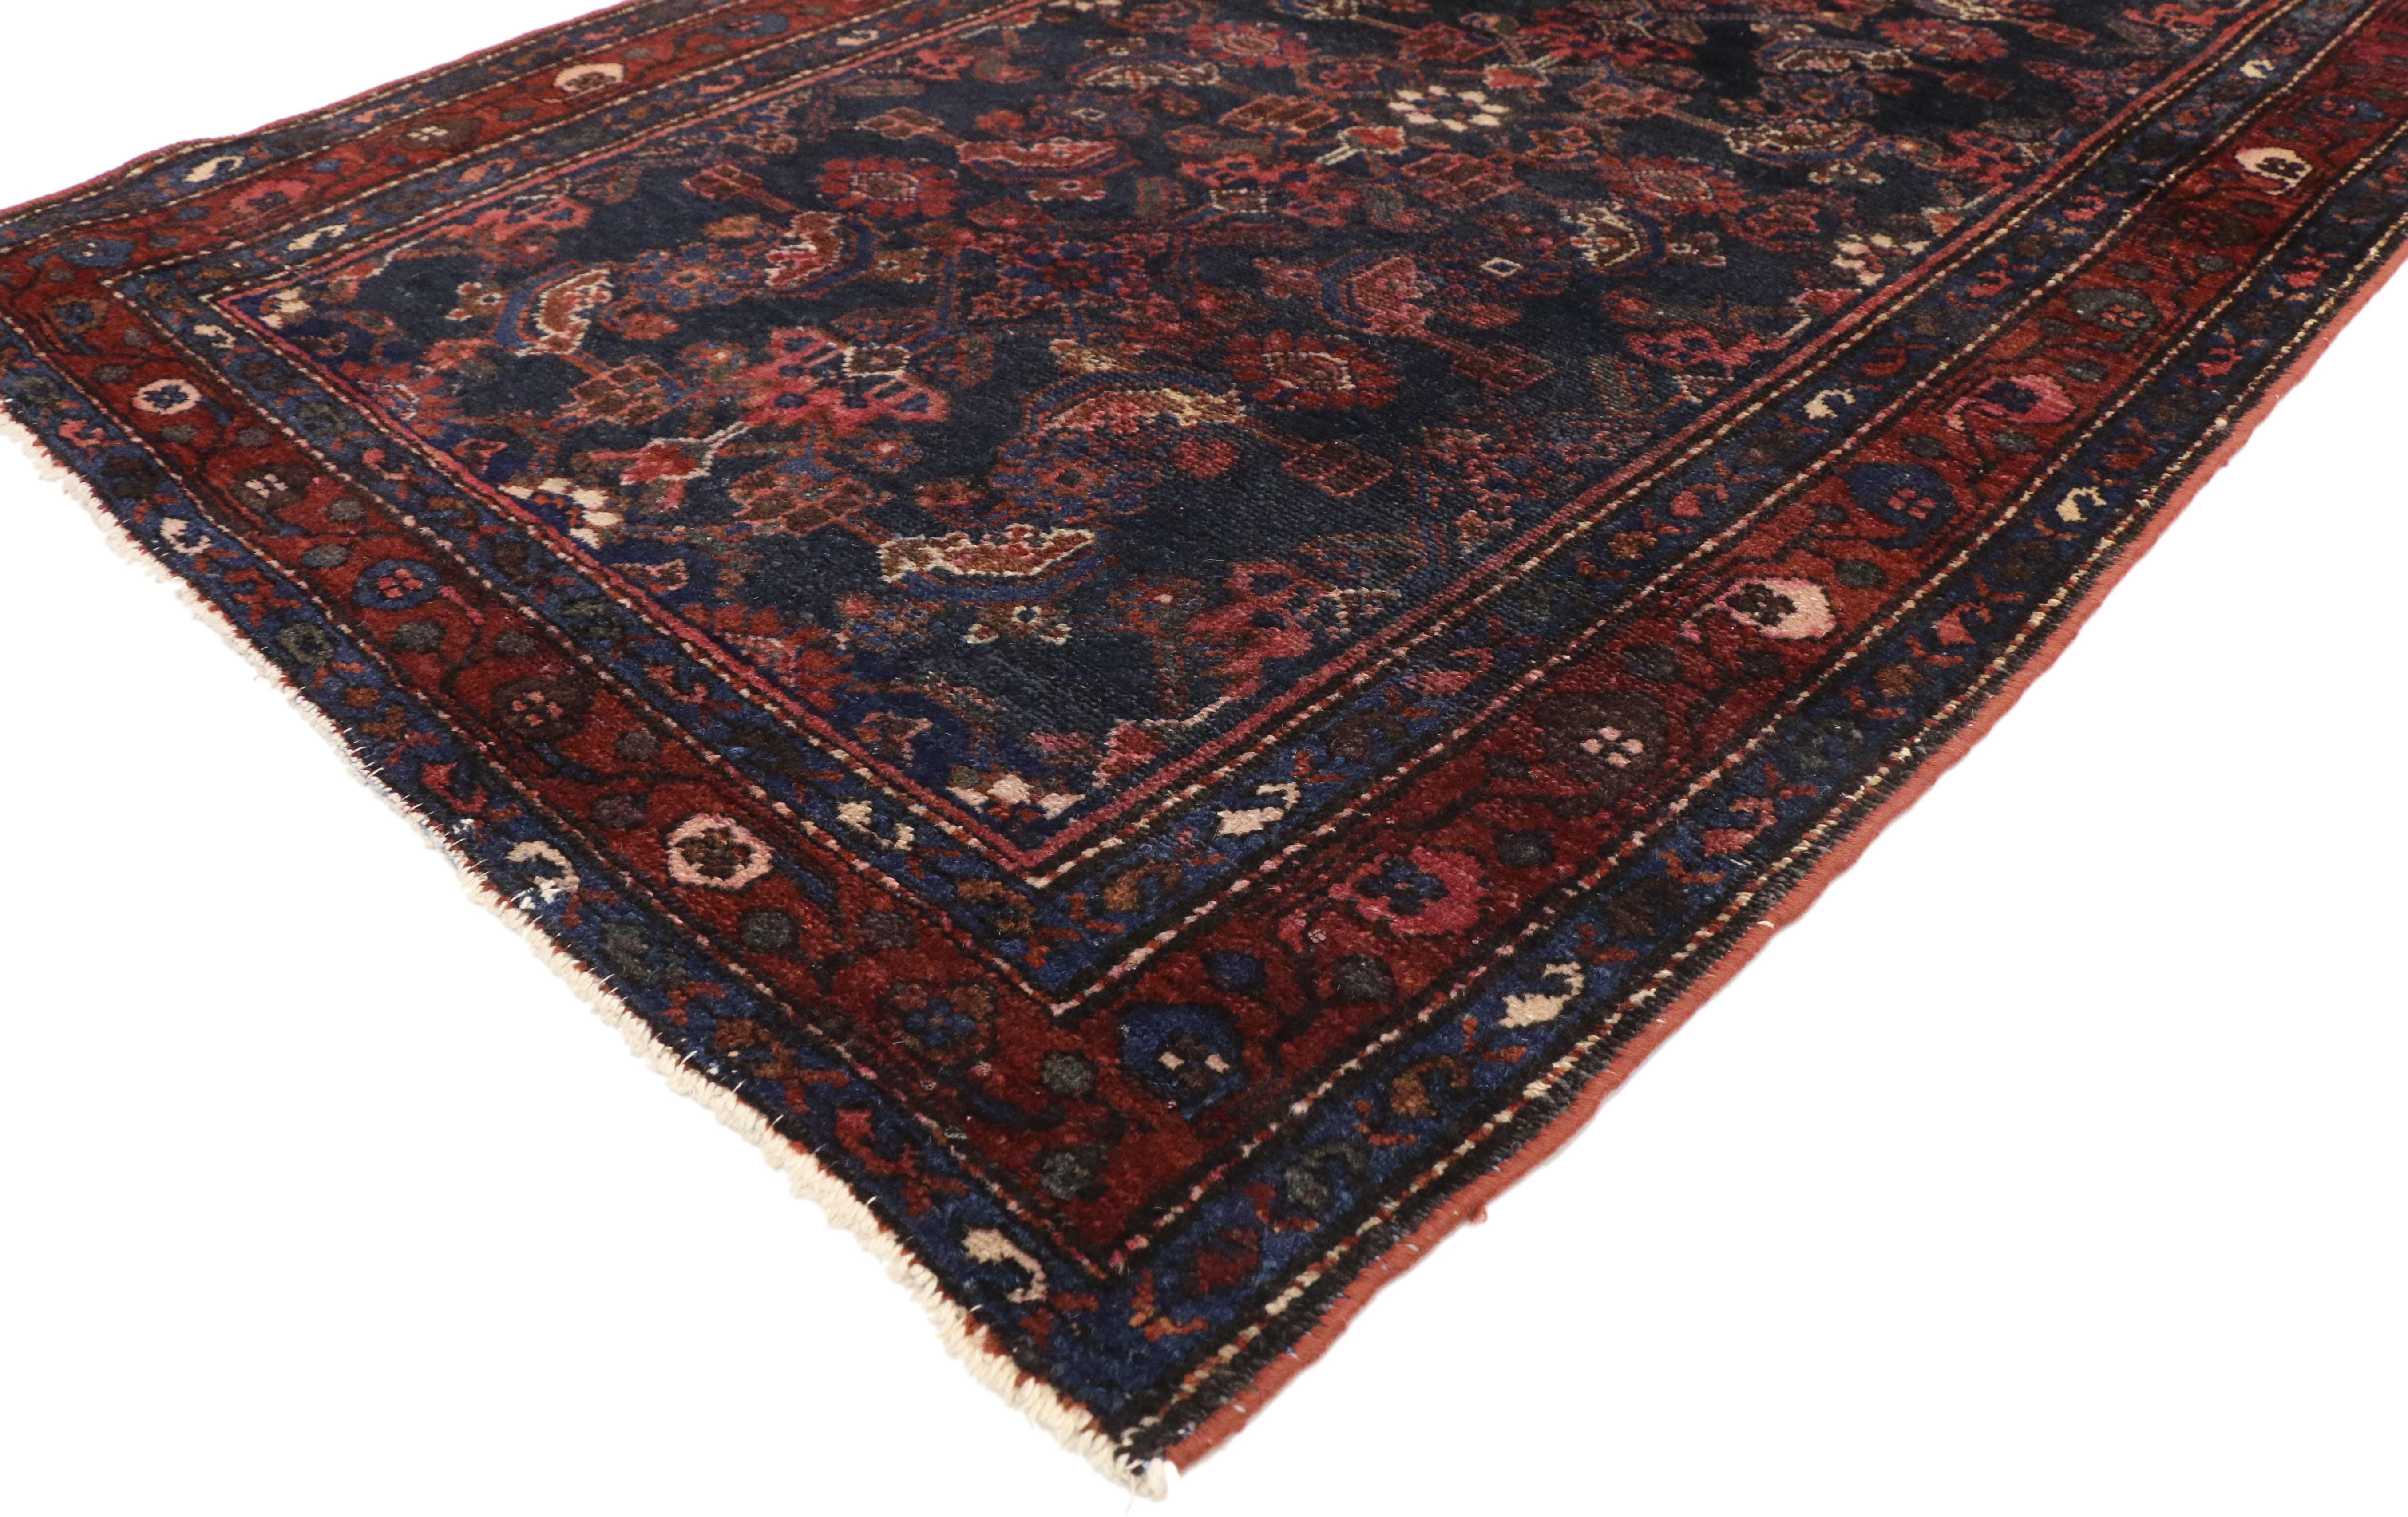 71848, antique Persian Hussainabad Hamadan accent rug with Victorian style. This hand knotted wool antique Persian Hussainabad Hamadan accent rug features an all-over Herati pattern across an abrashed ink blue field. The highly stylized large-scale